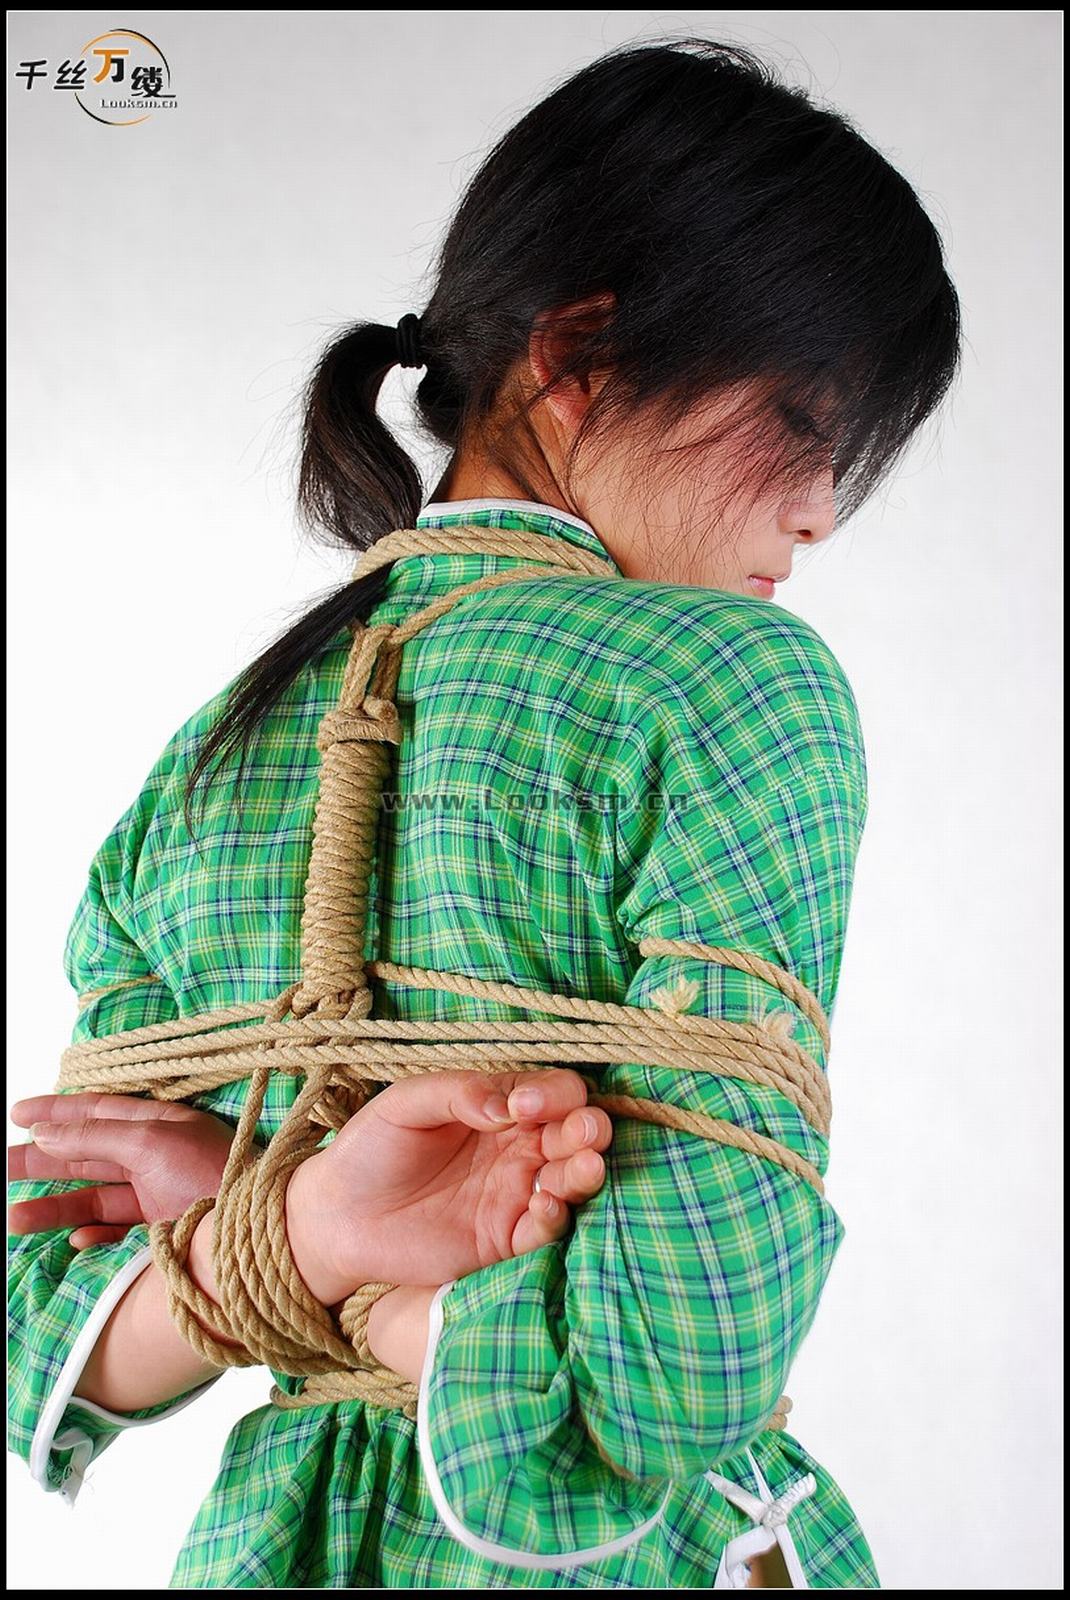 Chinese Rope Model 237